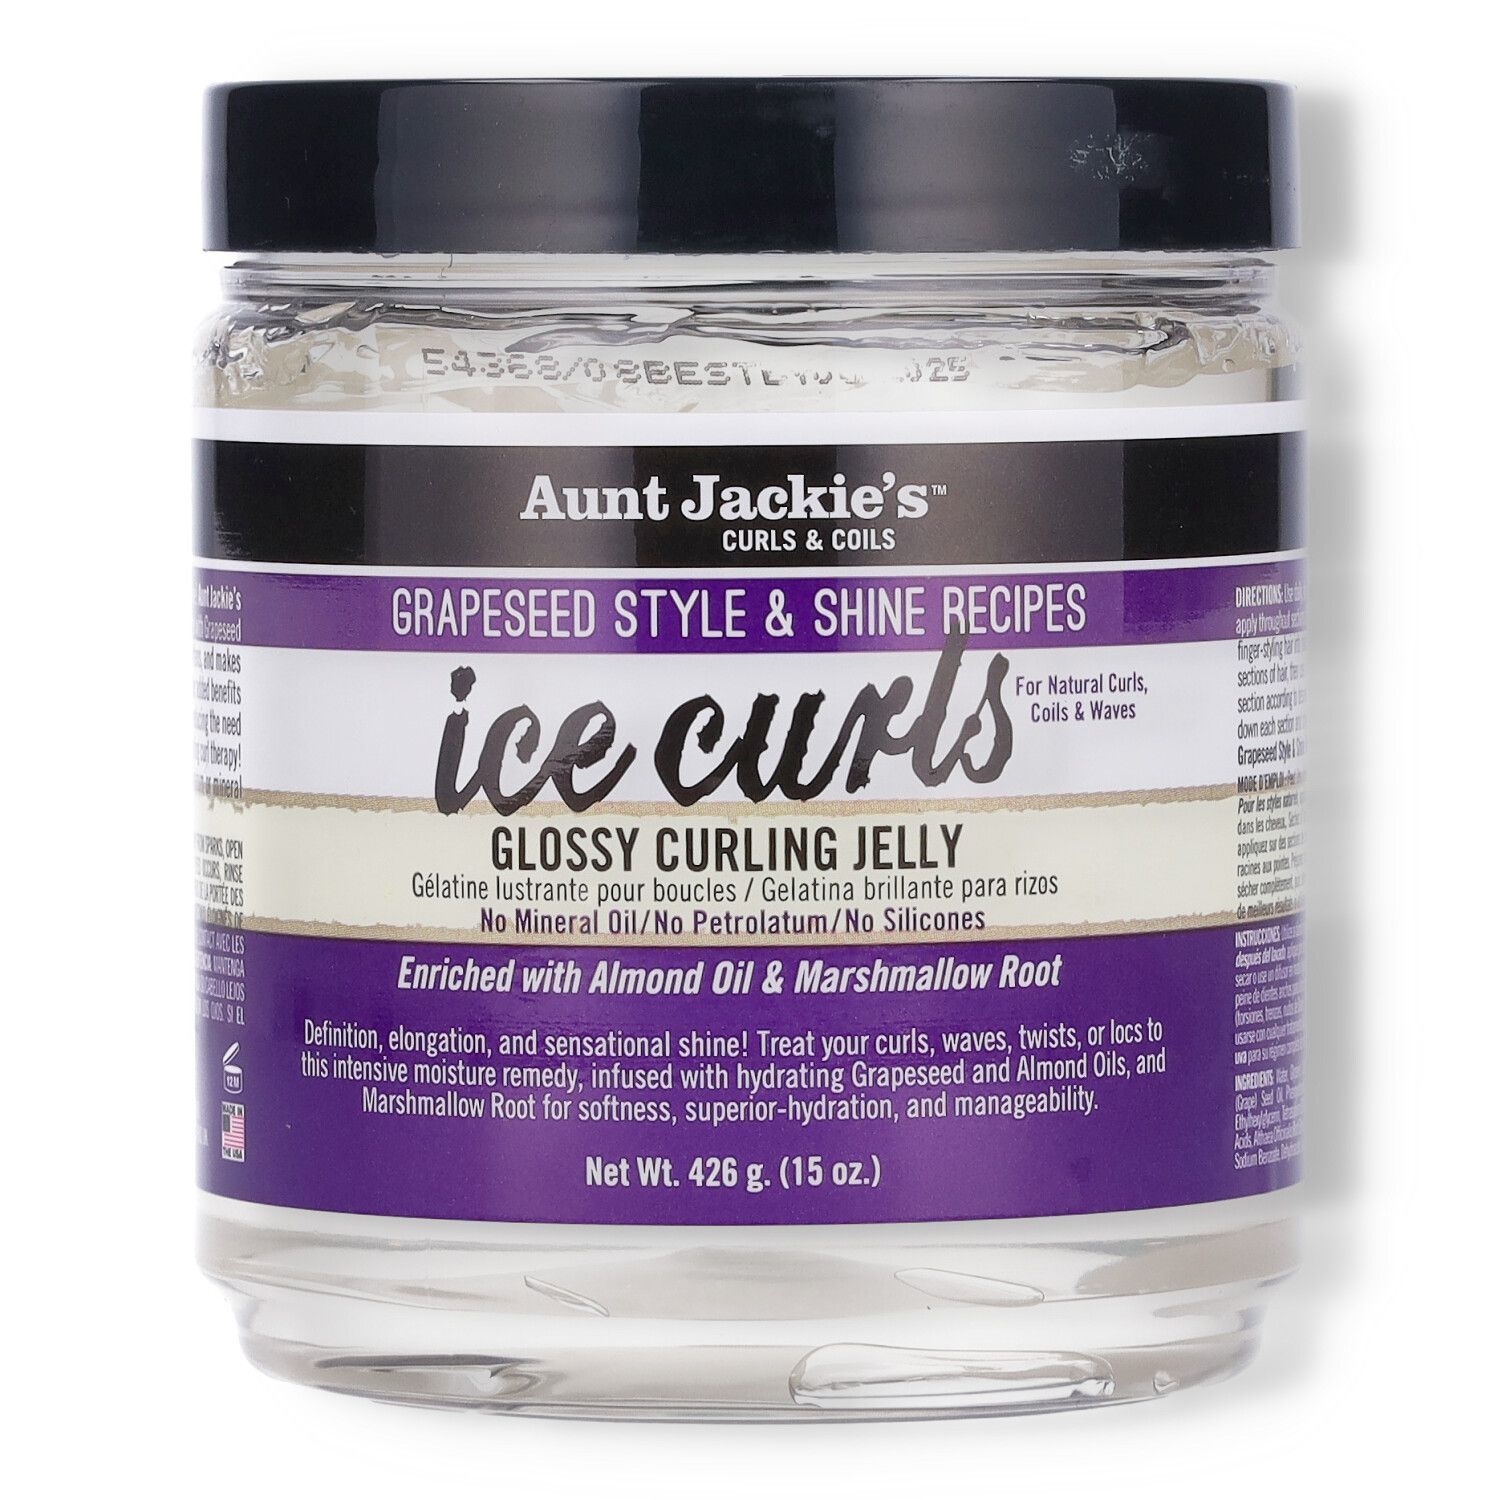 Aunt Jackie's Grapeseed Ice Curls Glossy Curling Jelly - 15oz